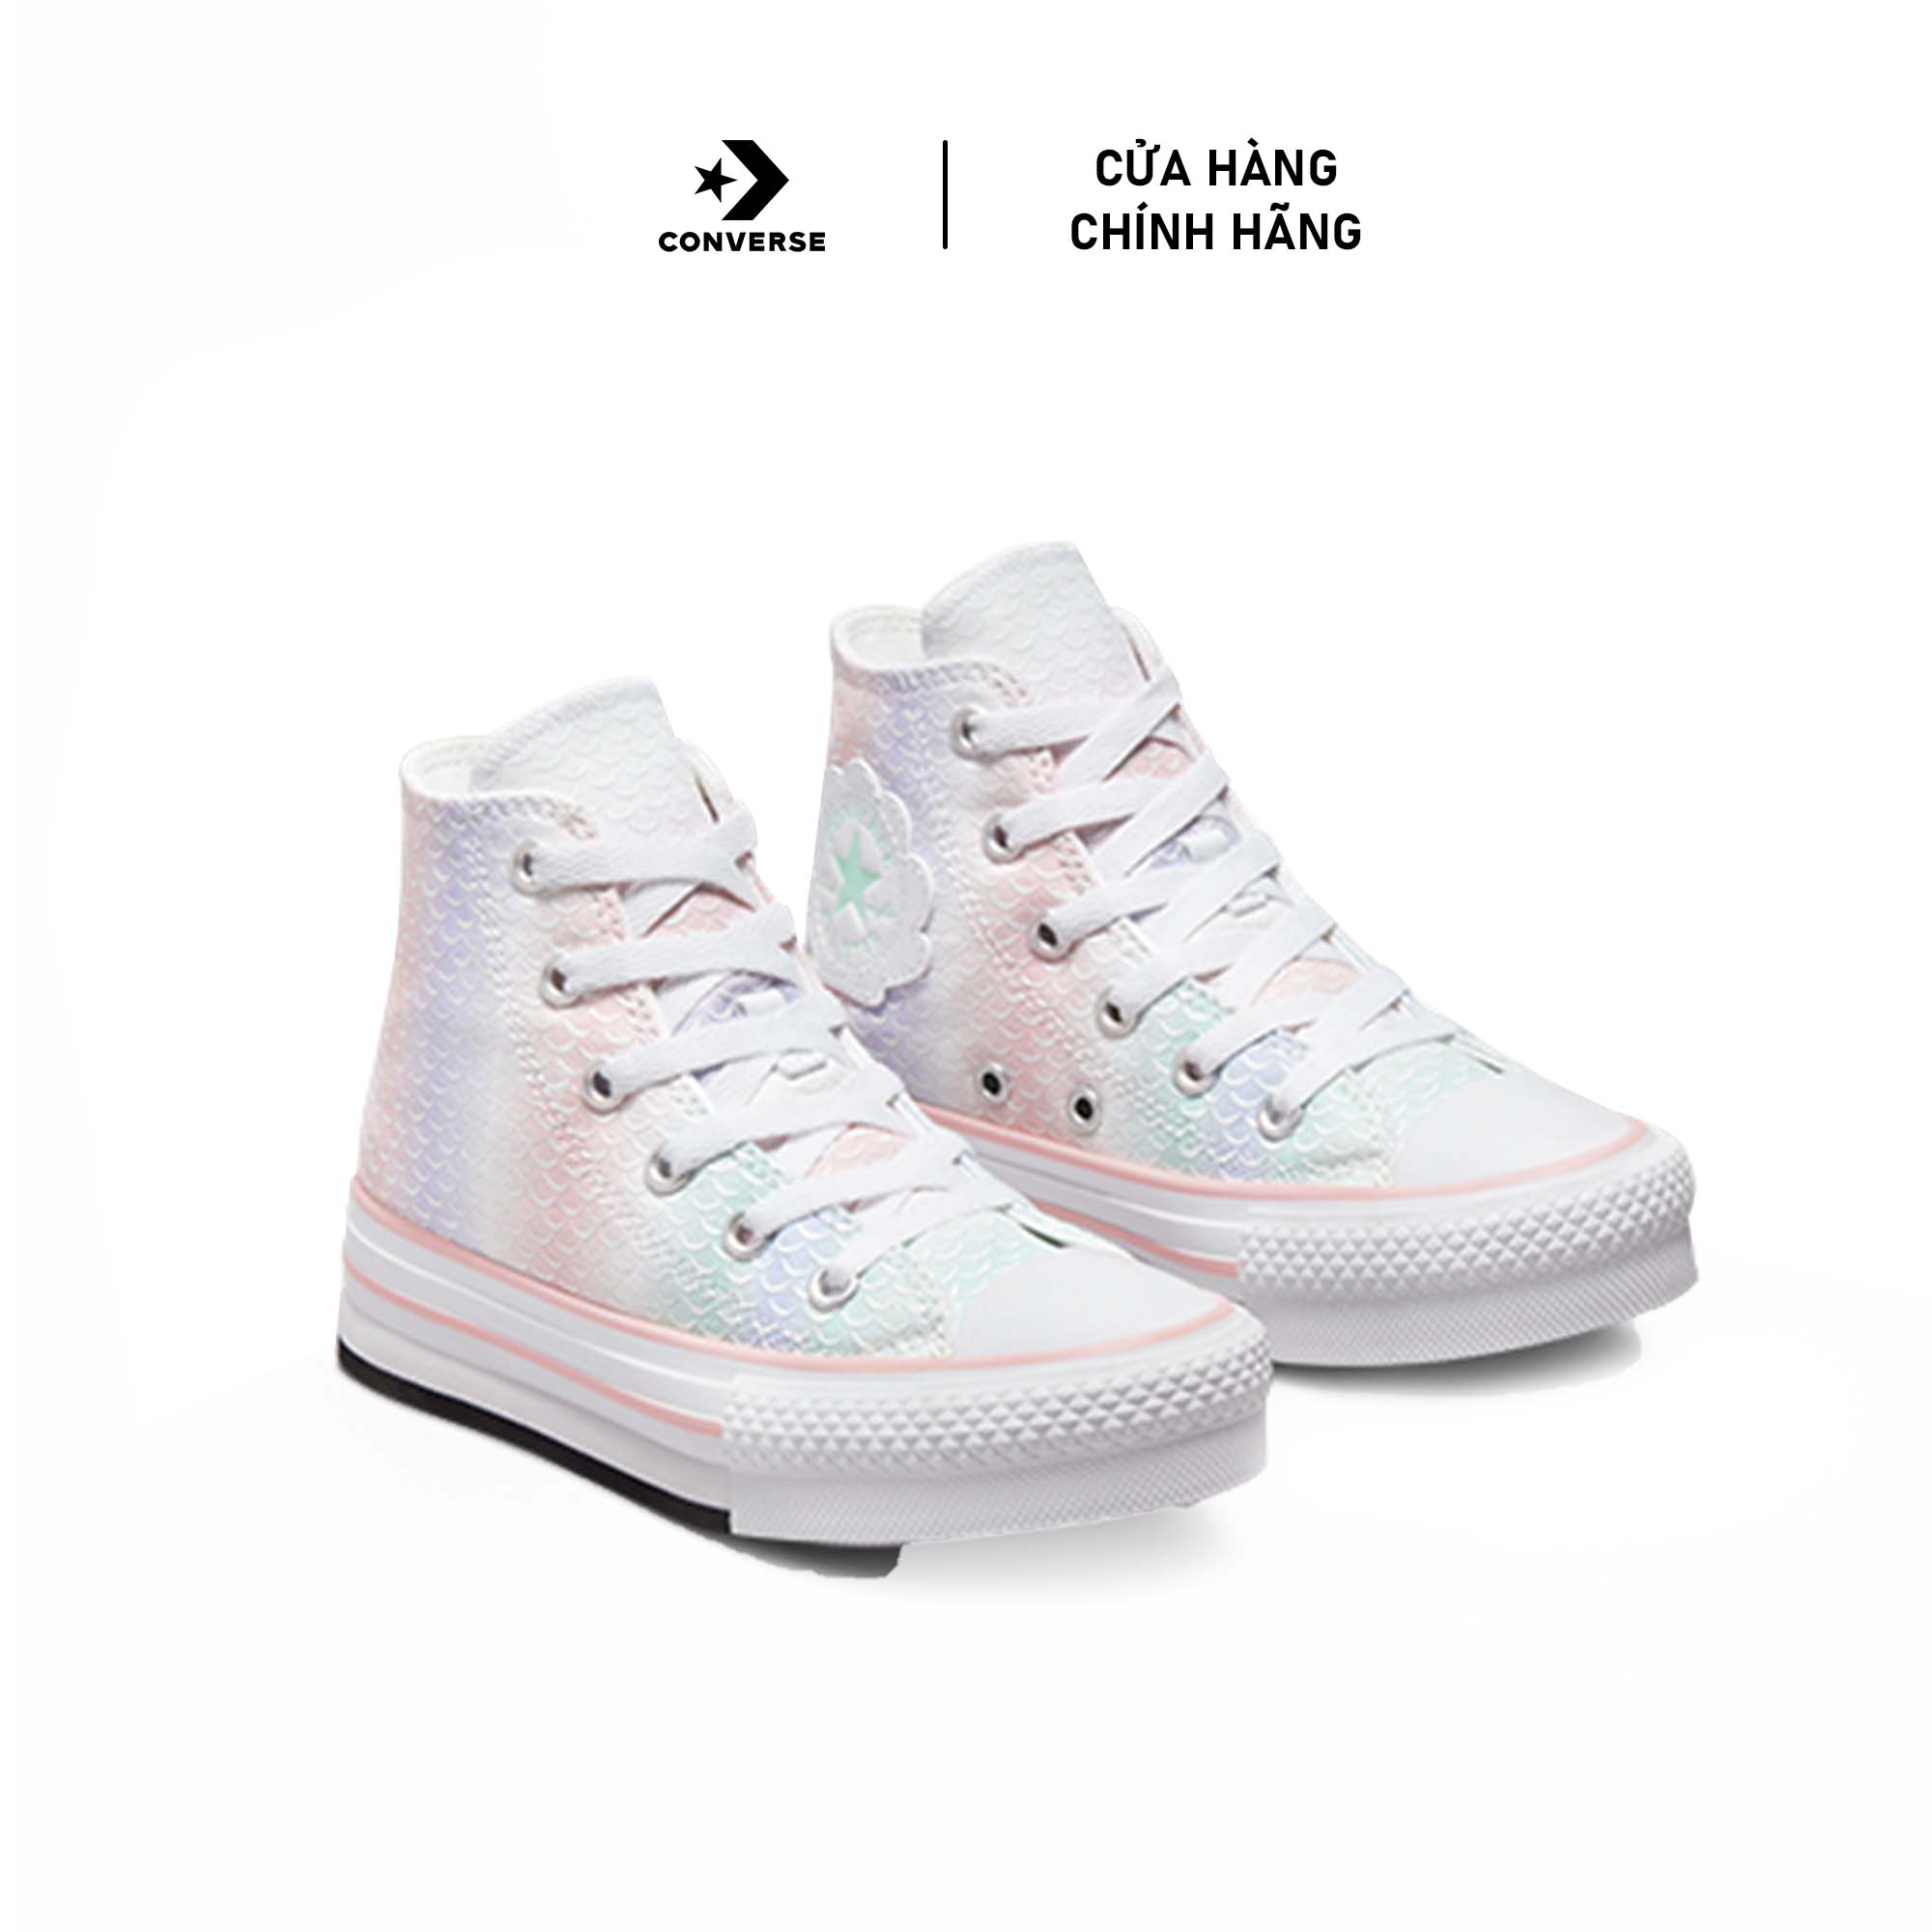 Giày Youth CONVERSE CHUCK TAYLOR ALL STAR EVA LIFT MERMAID SCALES PLATFORM  HI WHITE/STORM PINK/LIGHT DEW CON372752C - MixASale